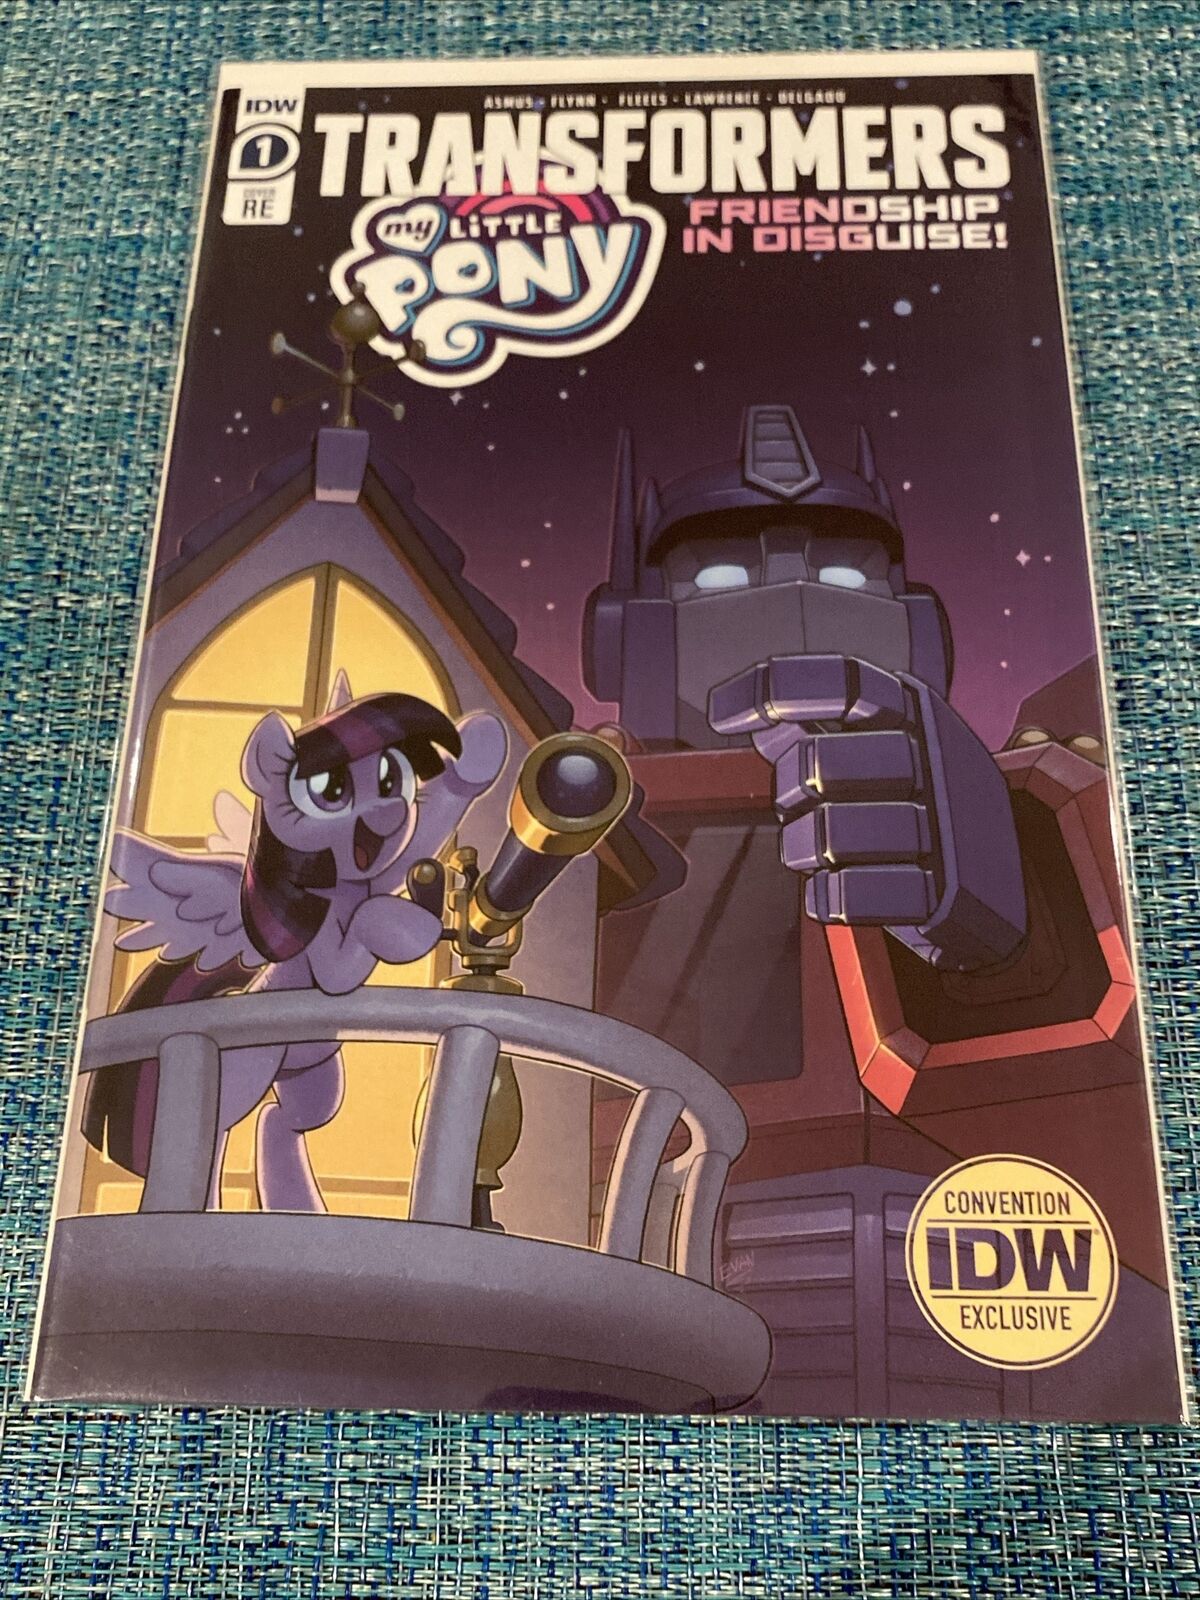 Transformers My Little Pony Friendship In Disguise #1 RE Con Exclusive SDCC (NM)